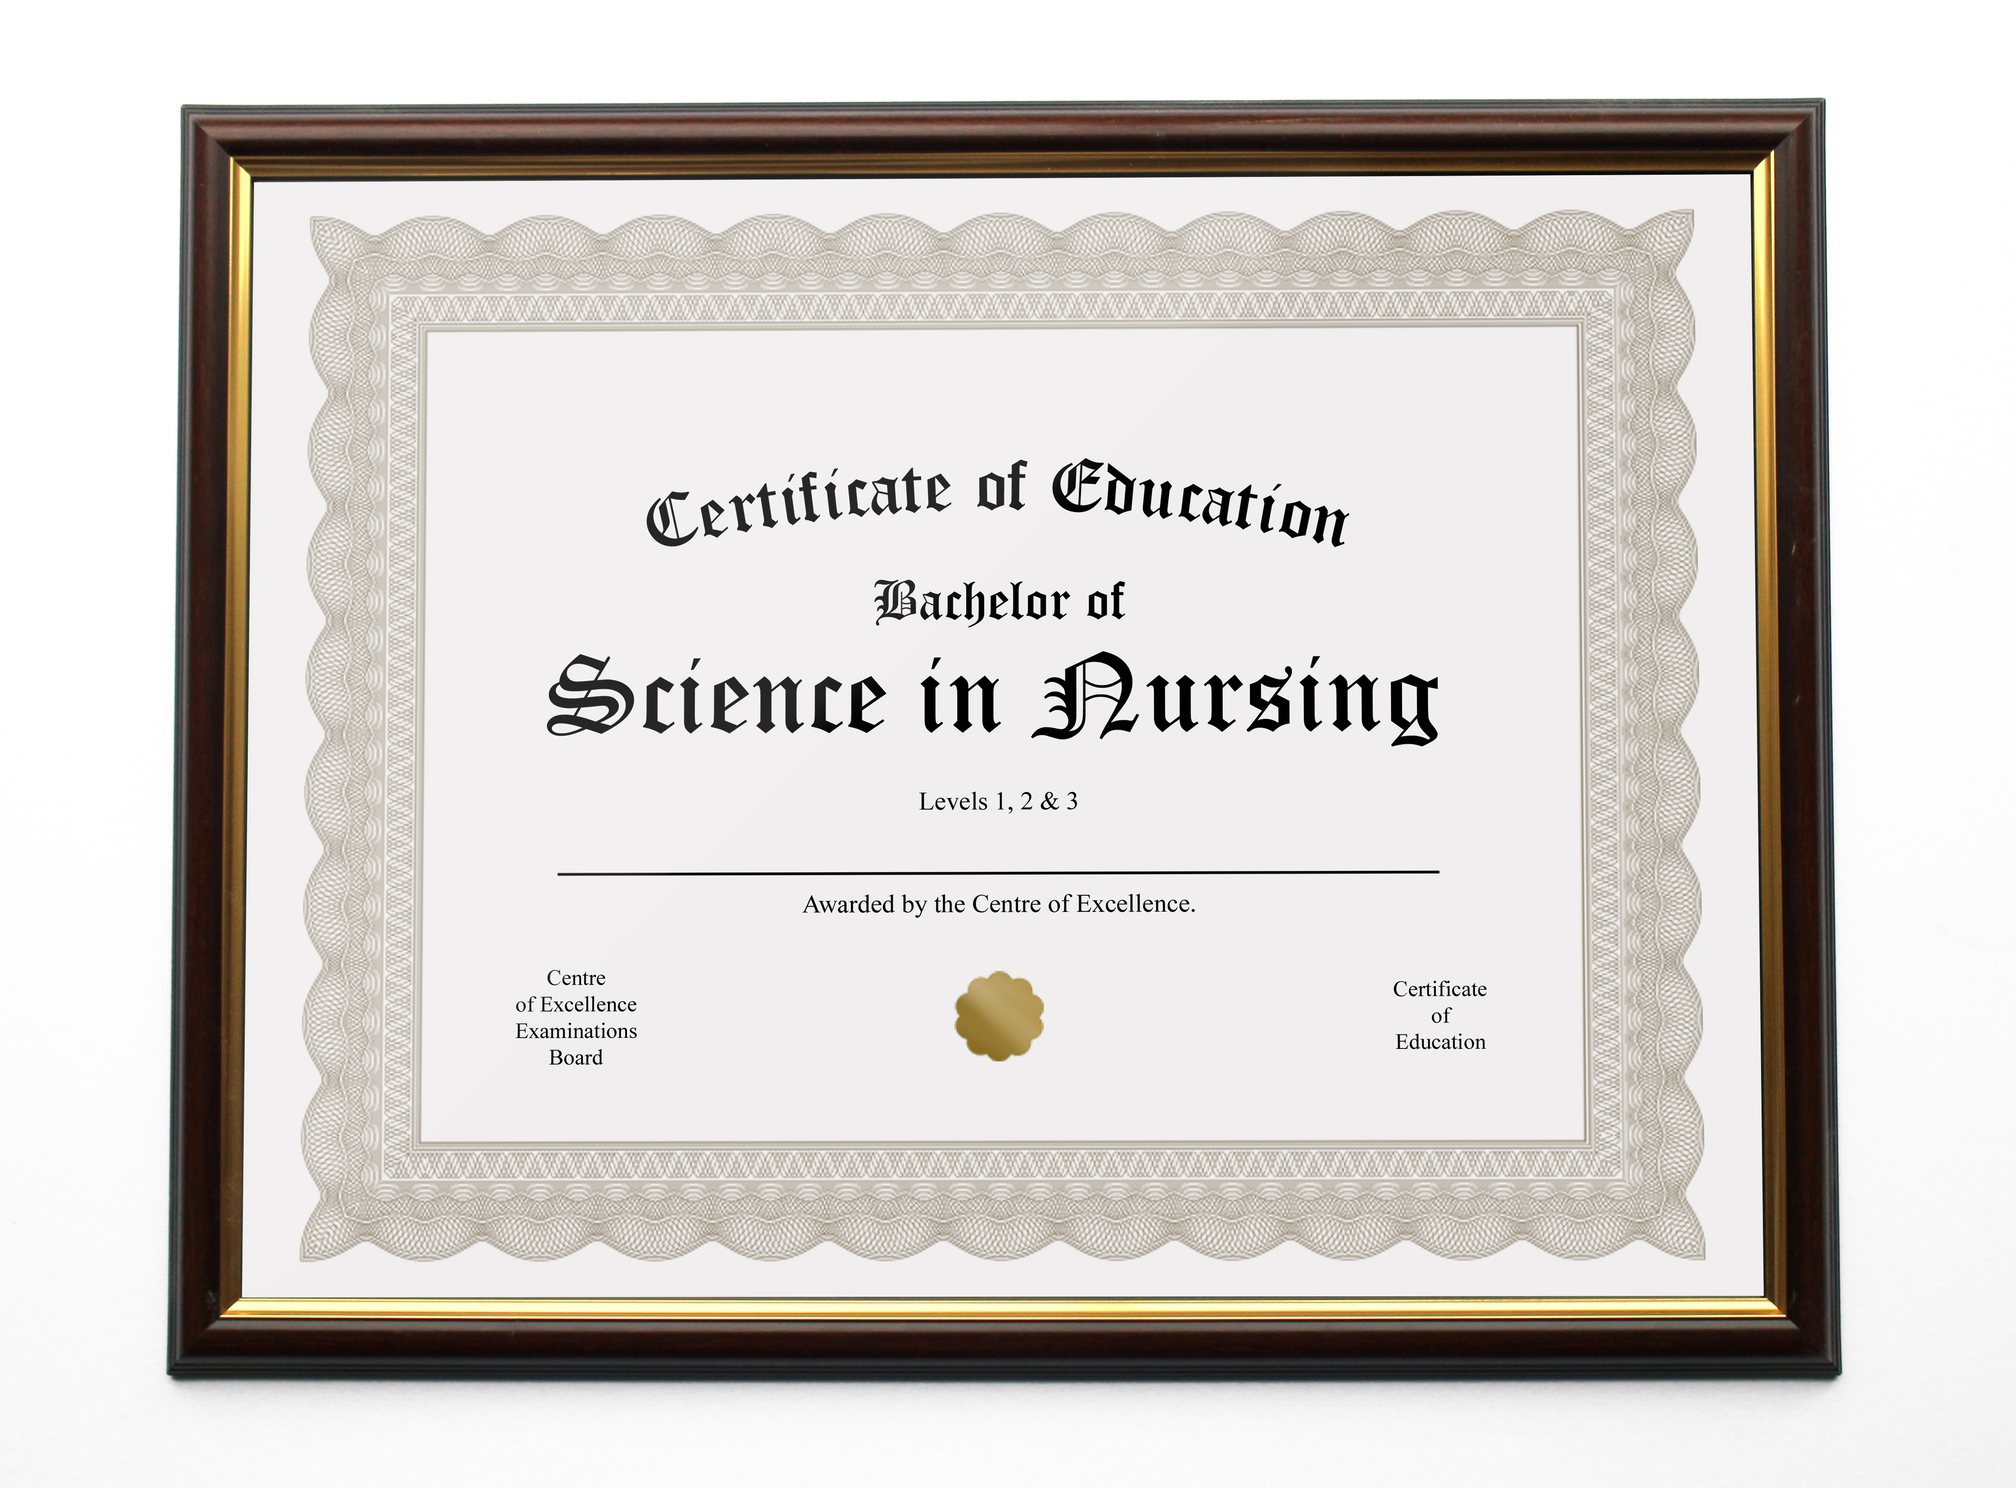 Framed certificate of completion for a Bachelor of Science in Nursing from the Centre of Excellence